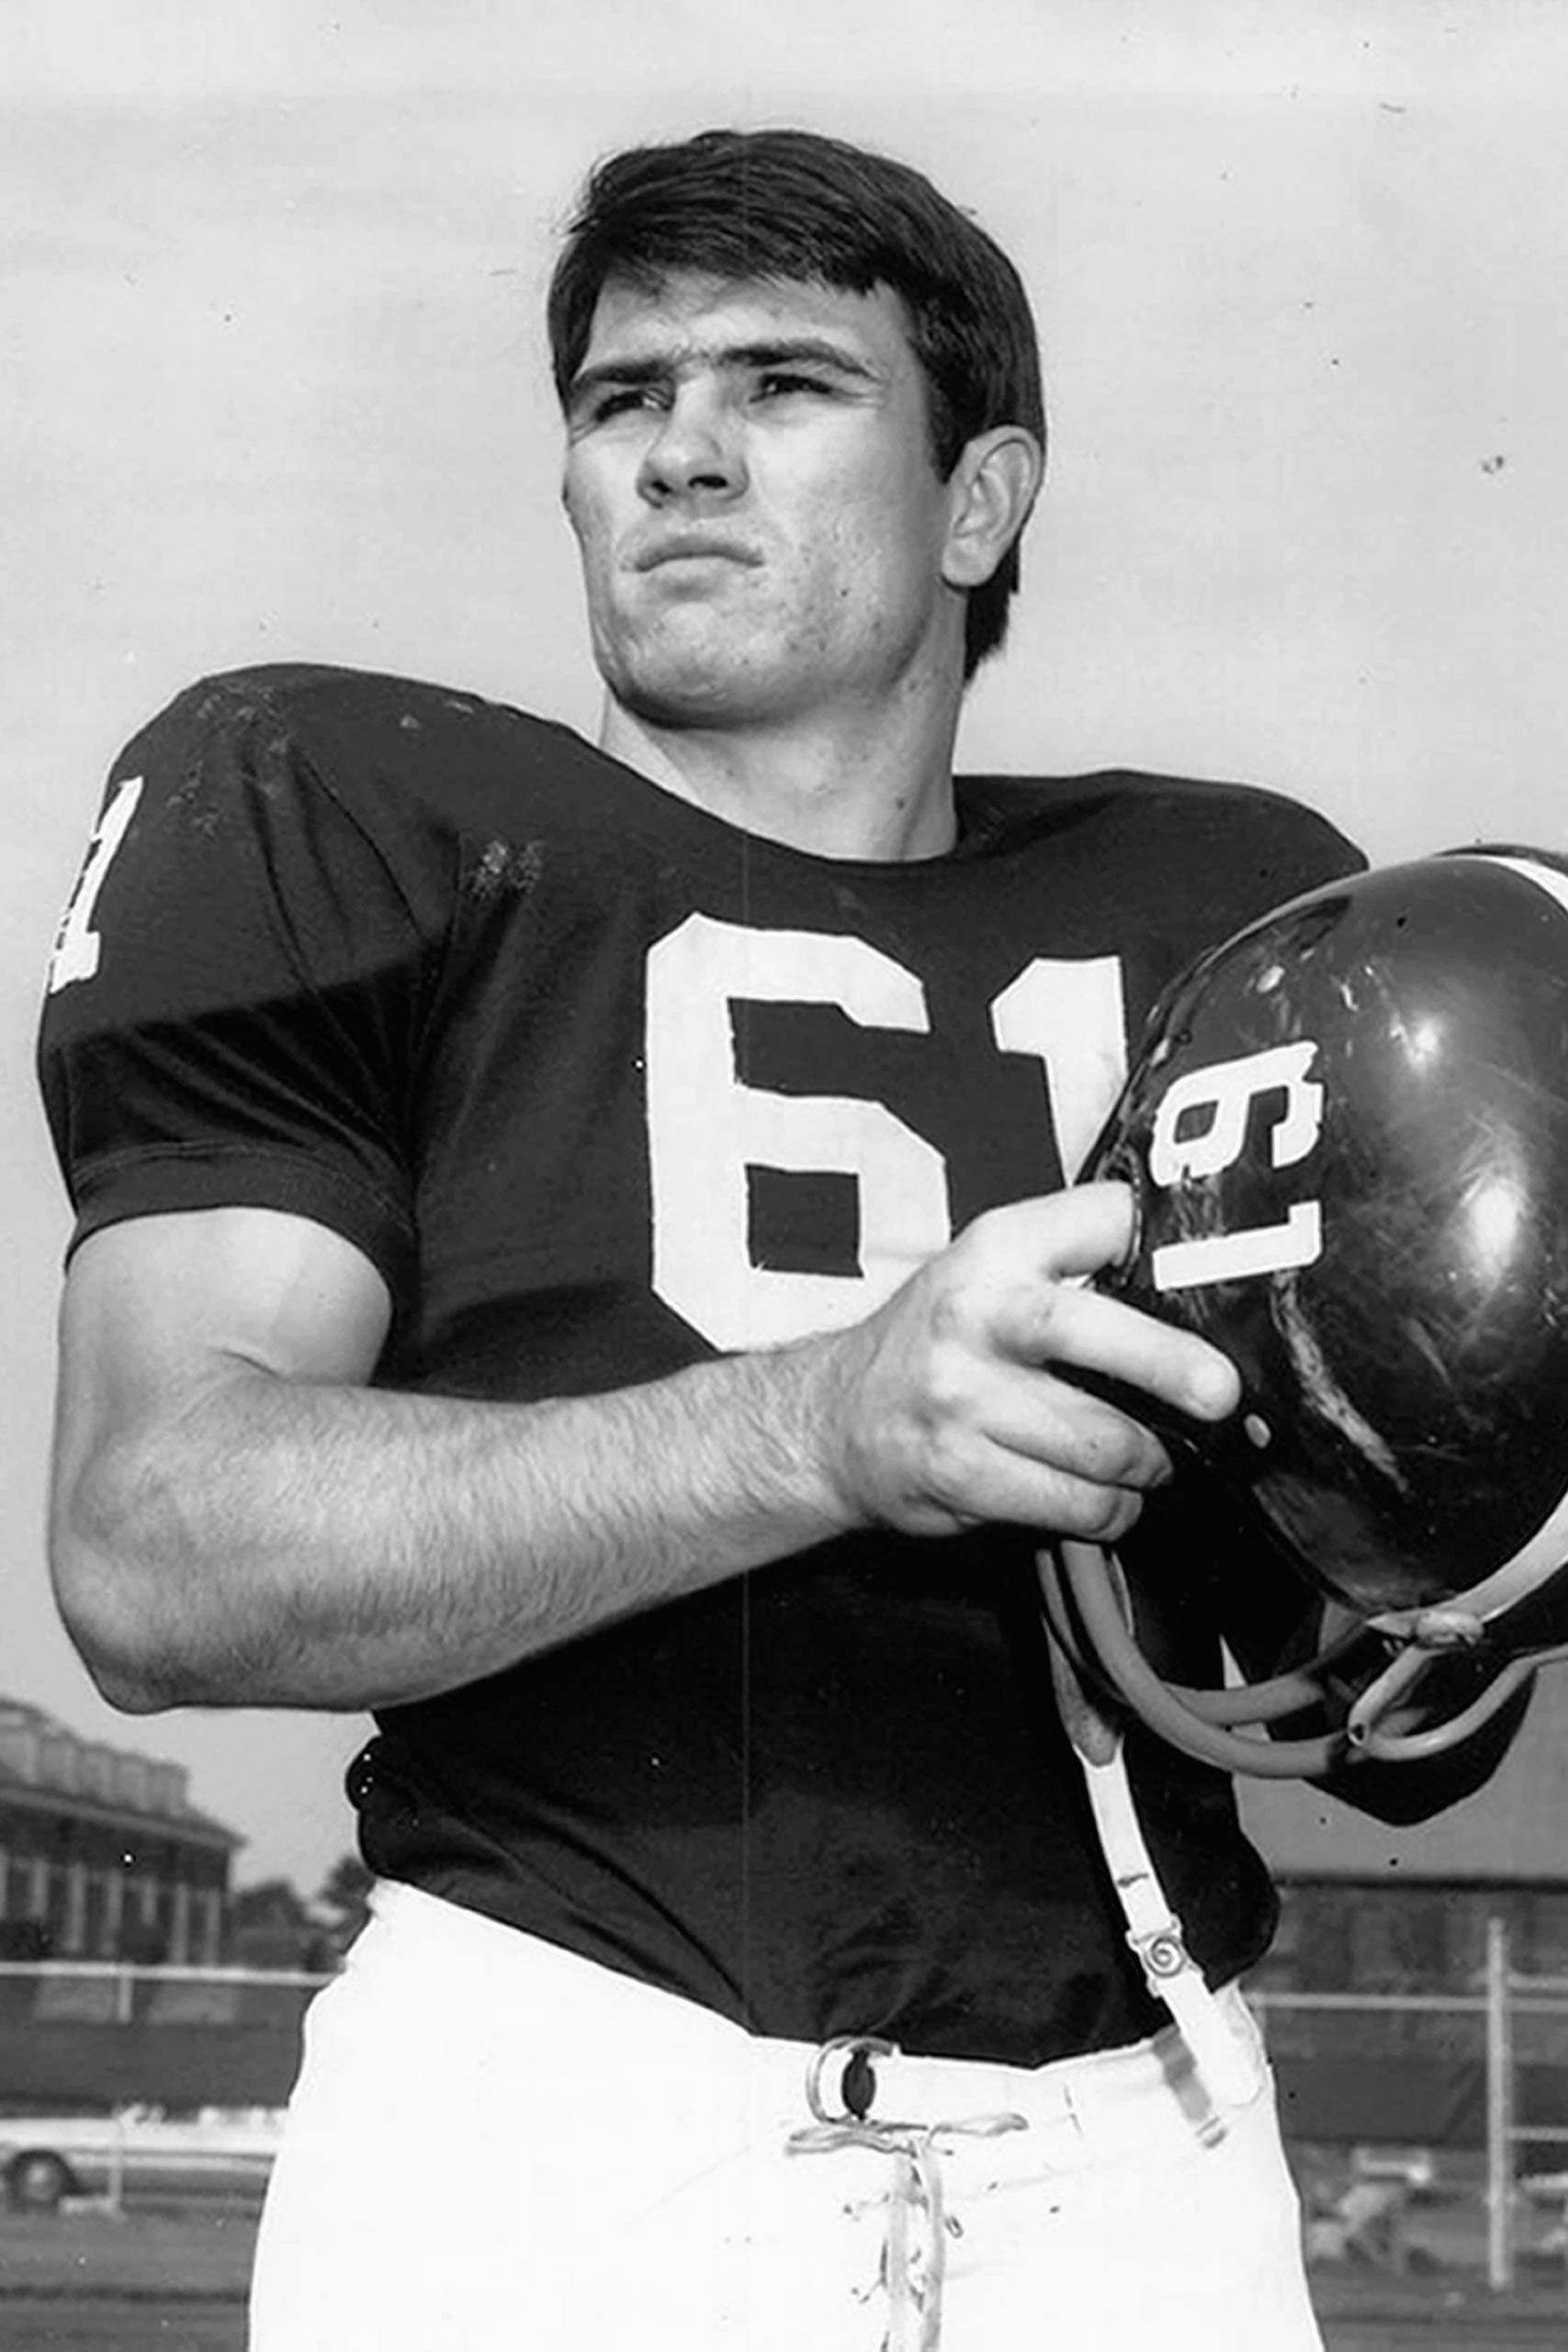 Tommy Lee Jones
                              The man in black’s first film role was as a Harvard student in Love Story (1970), but he didn’t have to pretend to be an ivy leaguer -- he was one. Jones graduated with a B.A. in English from Harvard and was also an offensive guard on the school’s undefeated 1968 varsity football team.